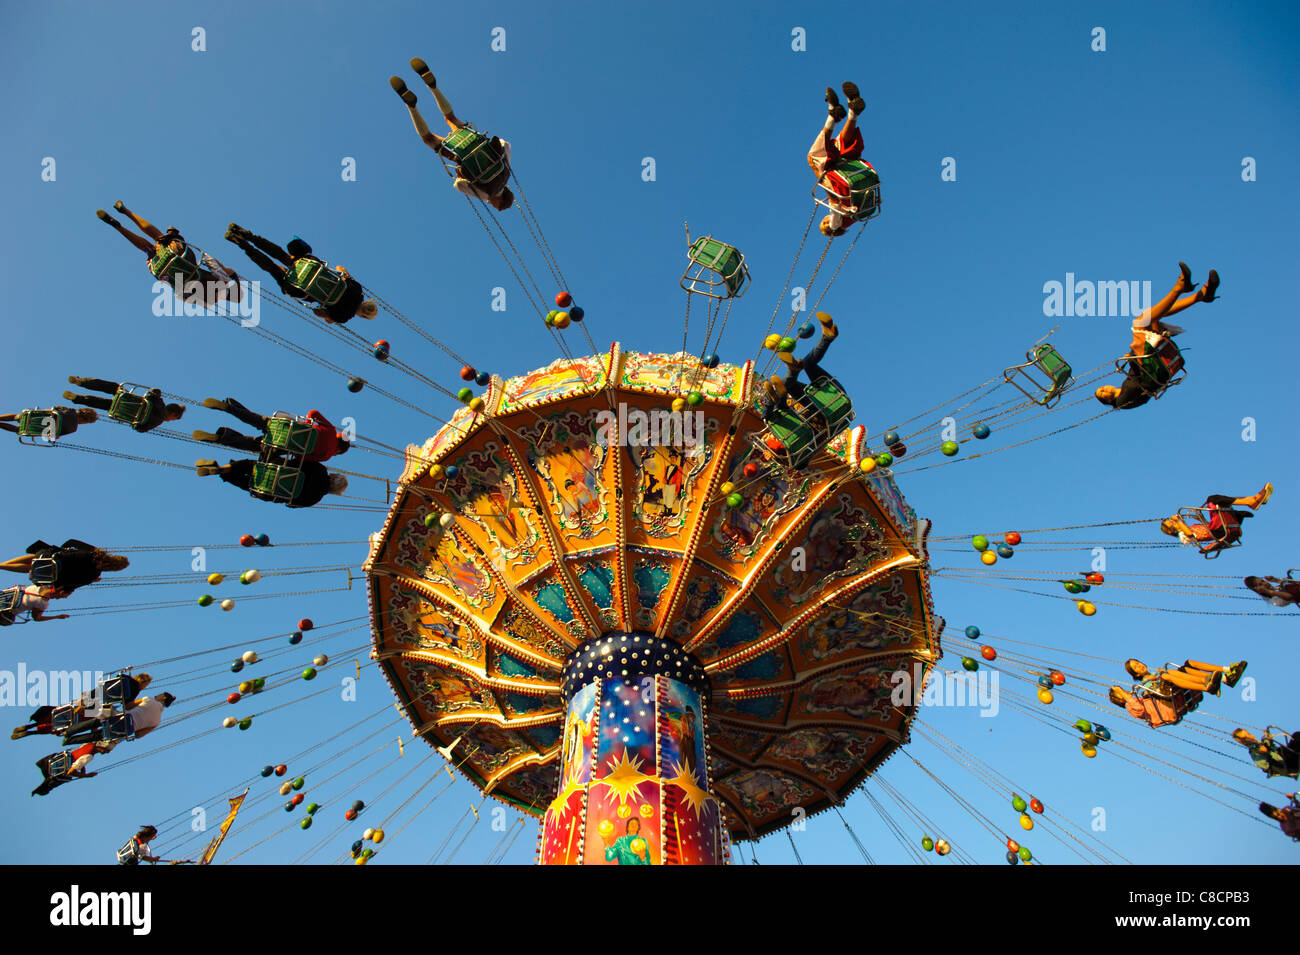 world famous Oktoberfest in Munich, Germany, with carousel and flying people Stock Photo